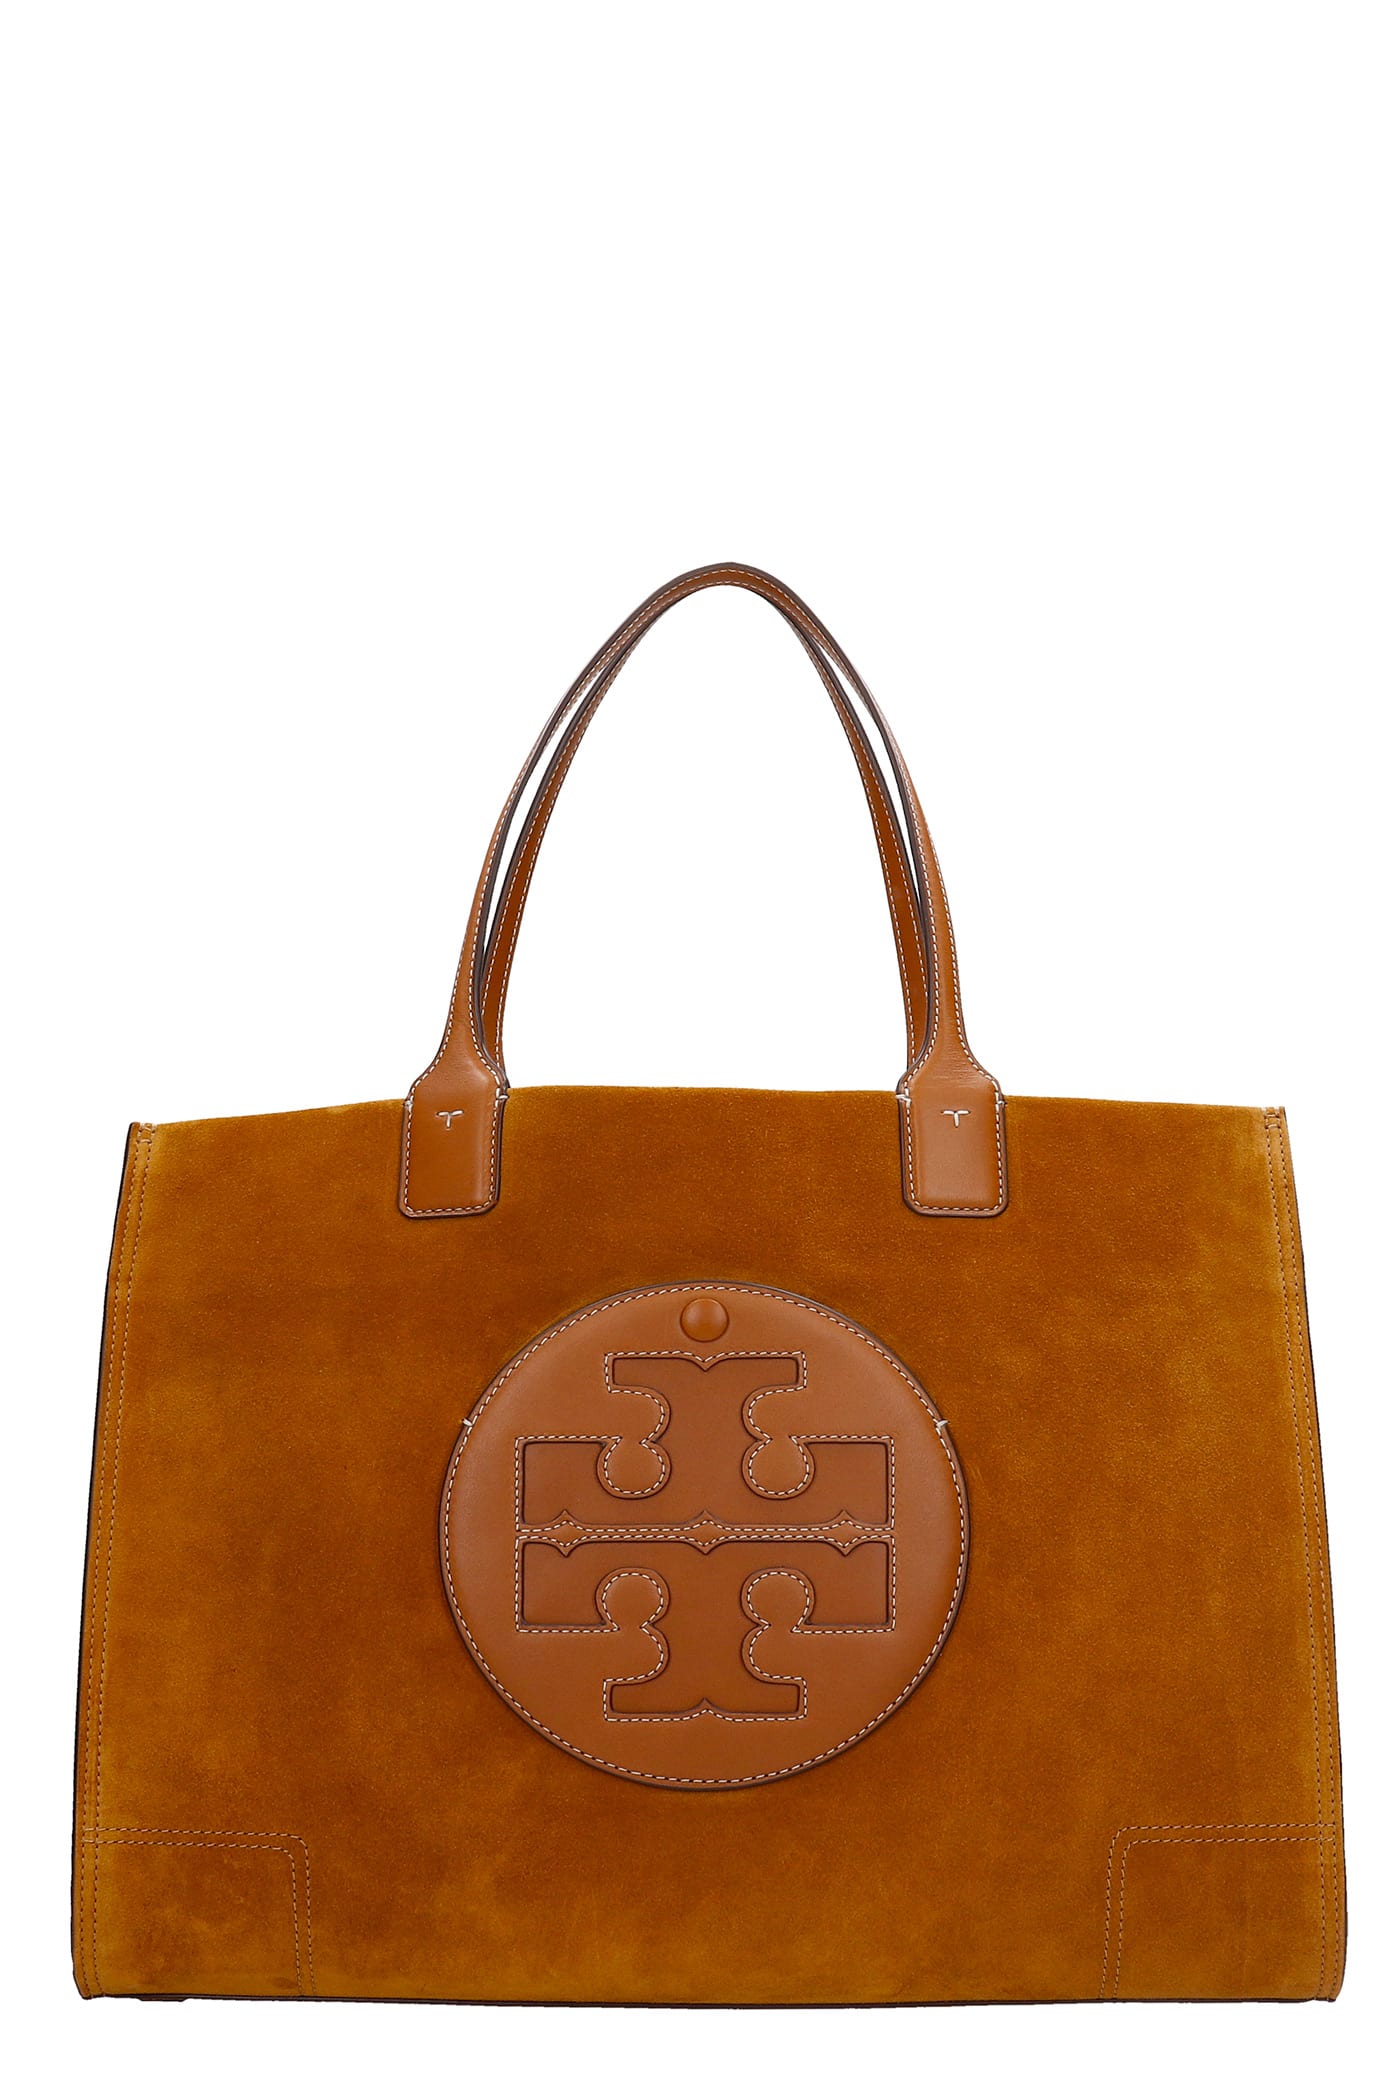 Tory Burch Ella Tote In Leather Color Suede